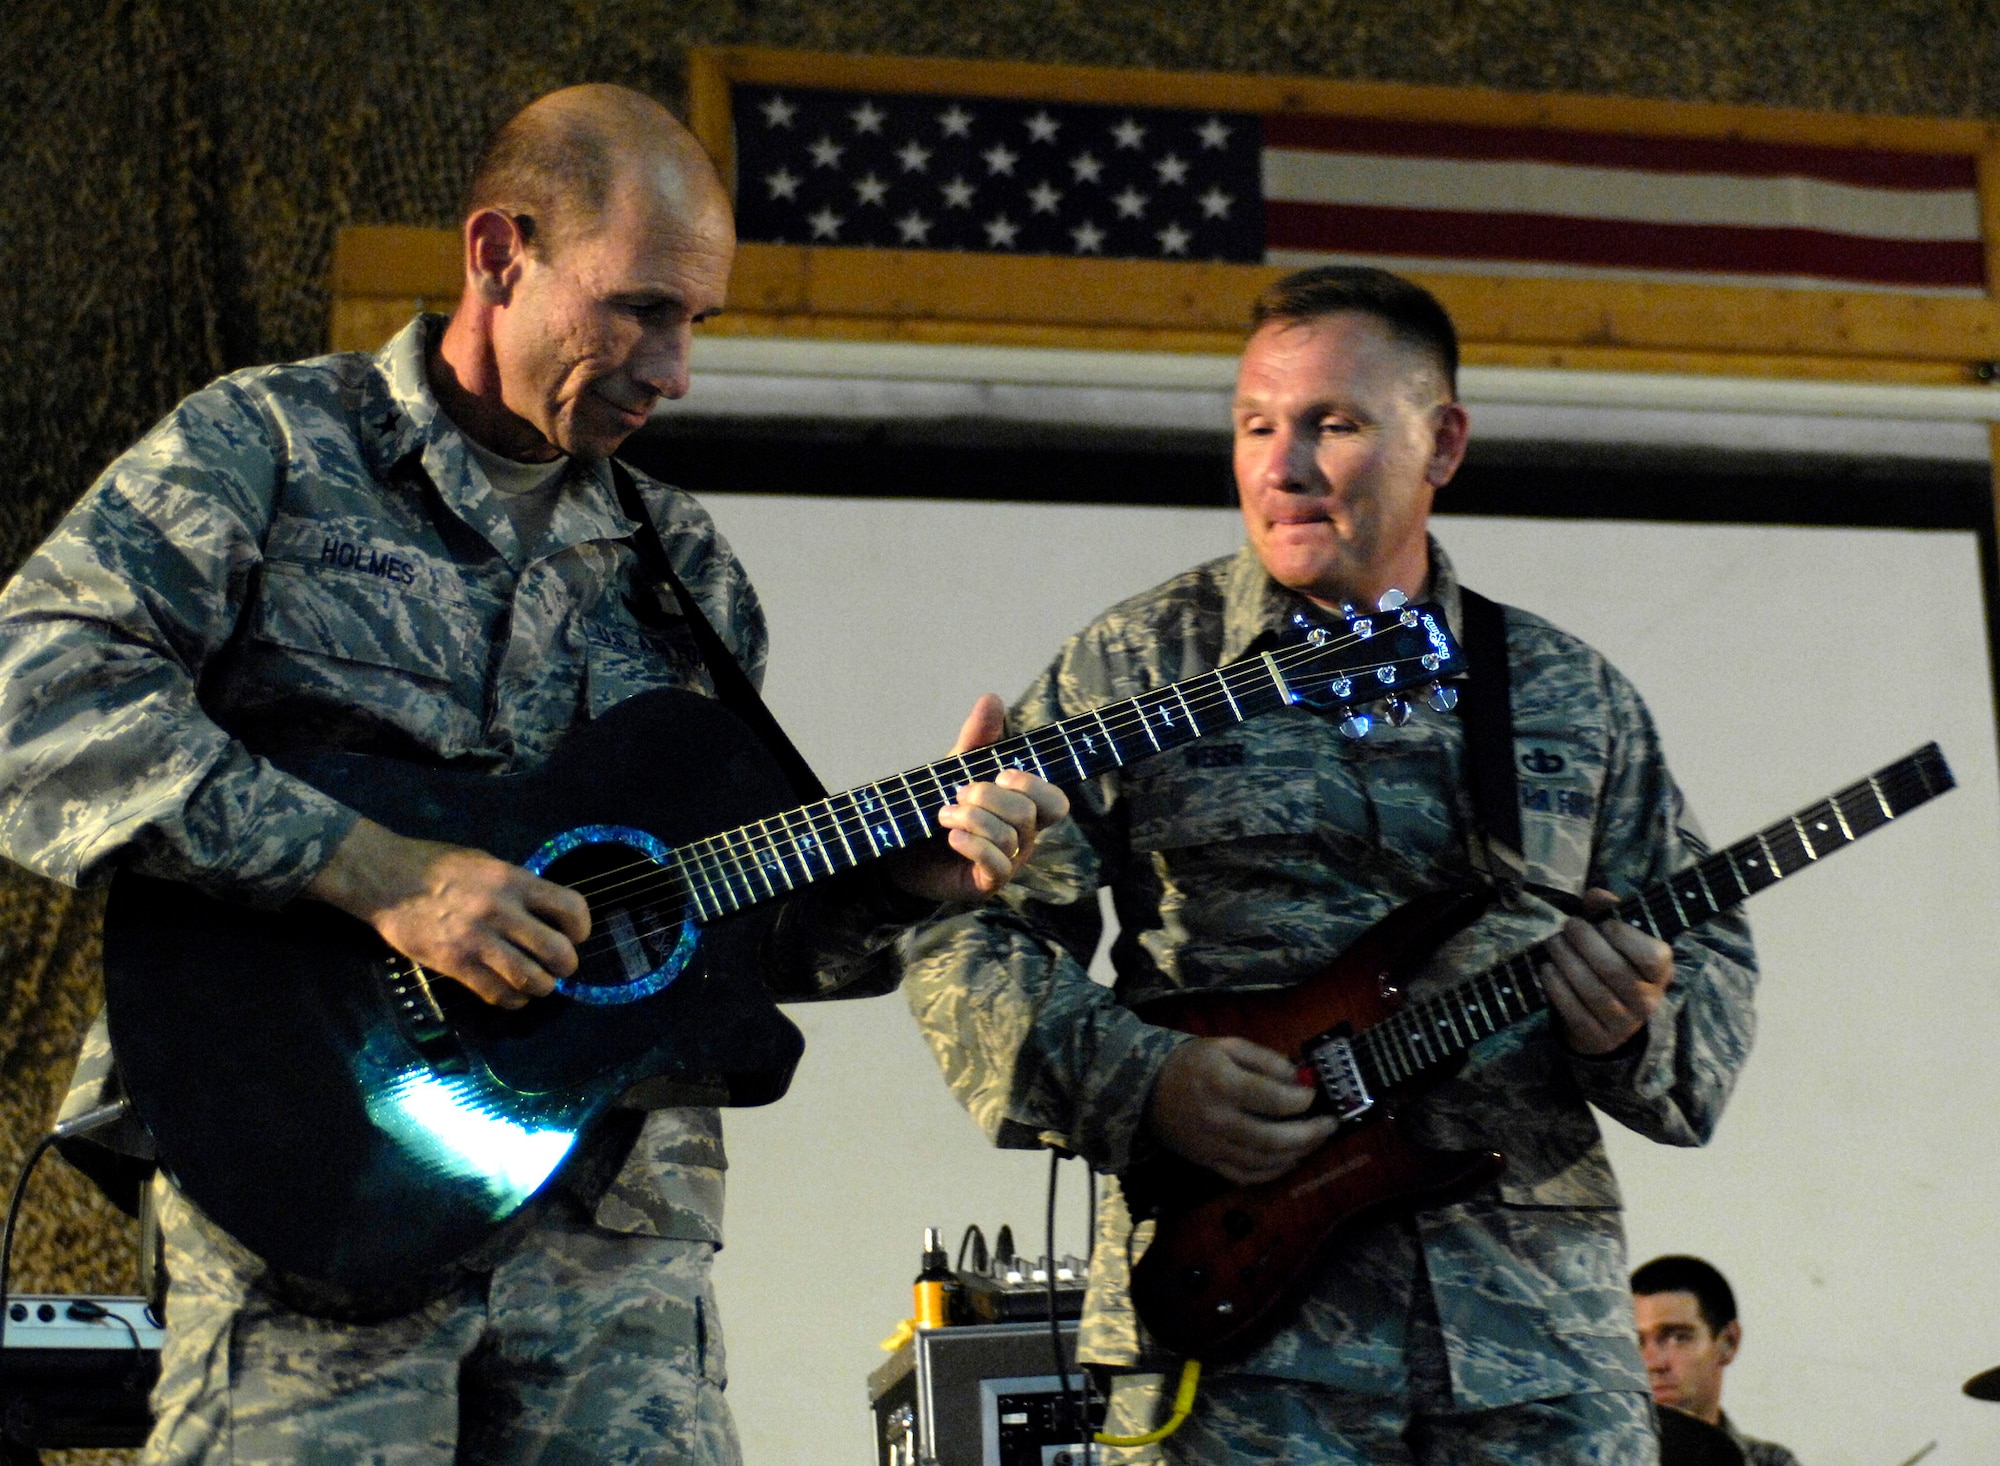 BAGRAM AIR FIELD, Afghanistan – Brig. Gen. Mike Holmes, 455th Air Expeditionary Wing commander, delivers a ‘star’ performance as Senior Master Sgt. James Weber, U.S. Air Forces Band ‘Falcon’ vocalist and guitarist, looks on during the band’s show here June 22.  ‘Falcon’ travels throughout the area of responsibility positively promoting troop morale, diplomacy and reach out to host nation communities.  (U.S. Air Force photo by Master Sgt. Demetrius Lester)
